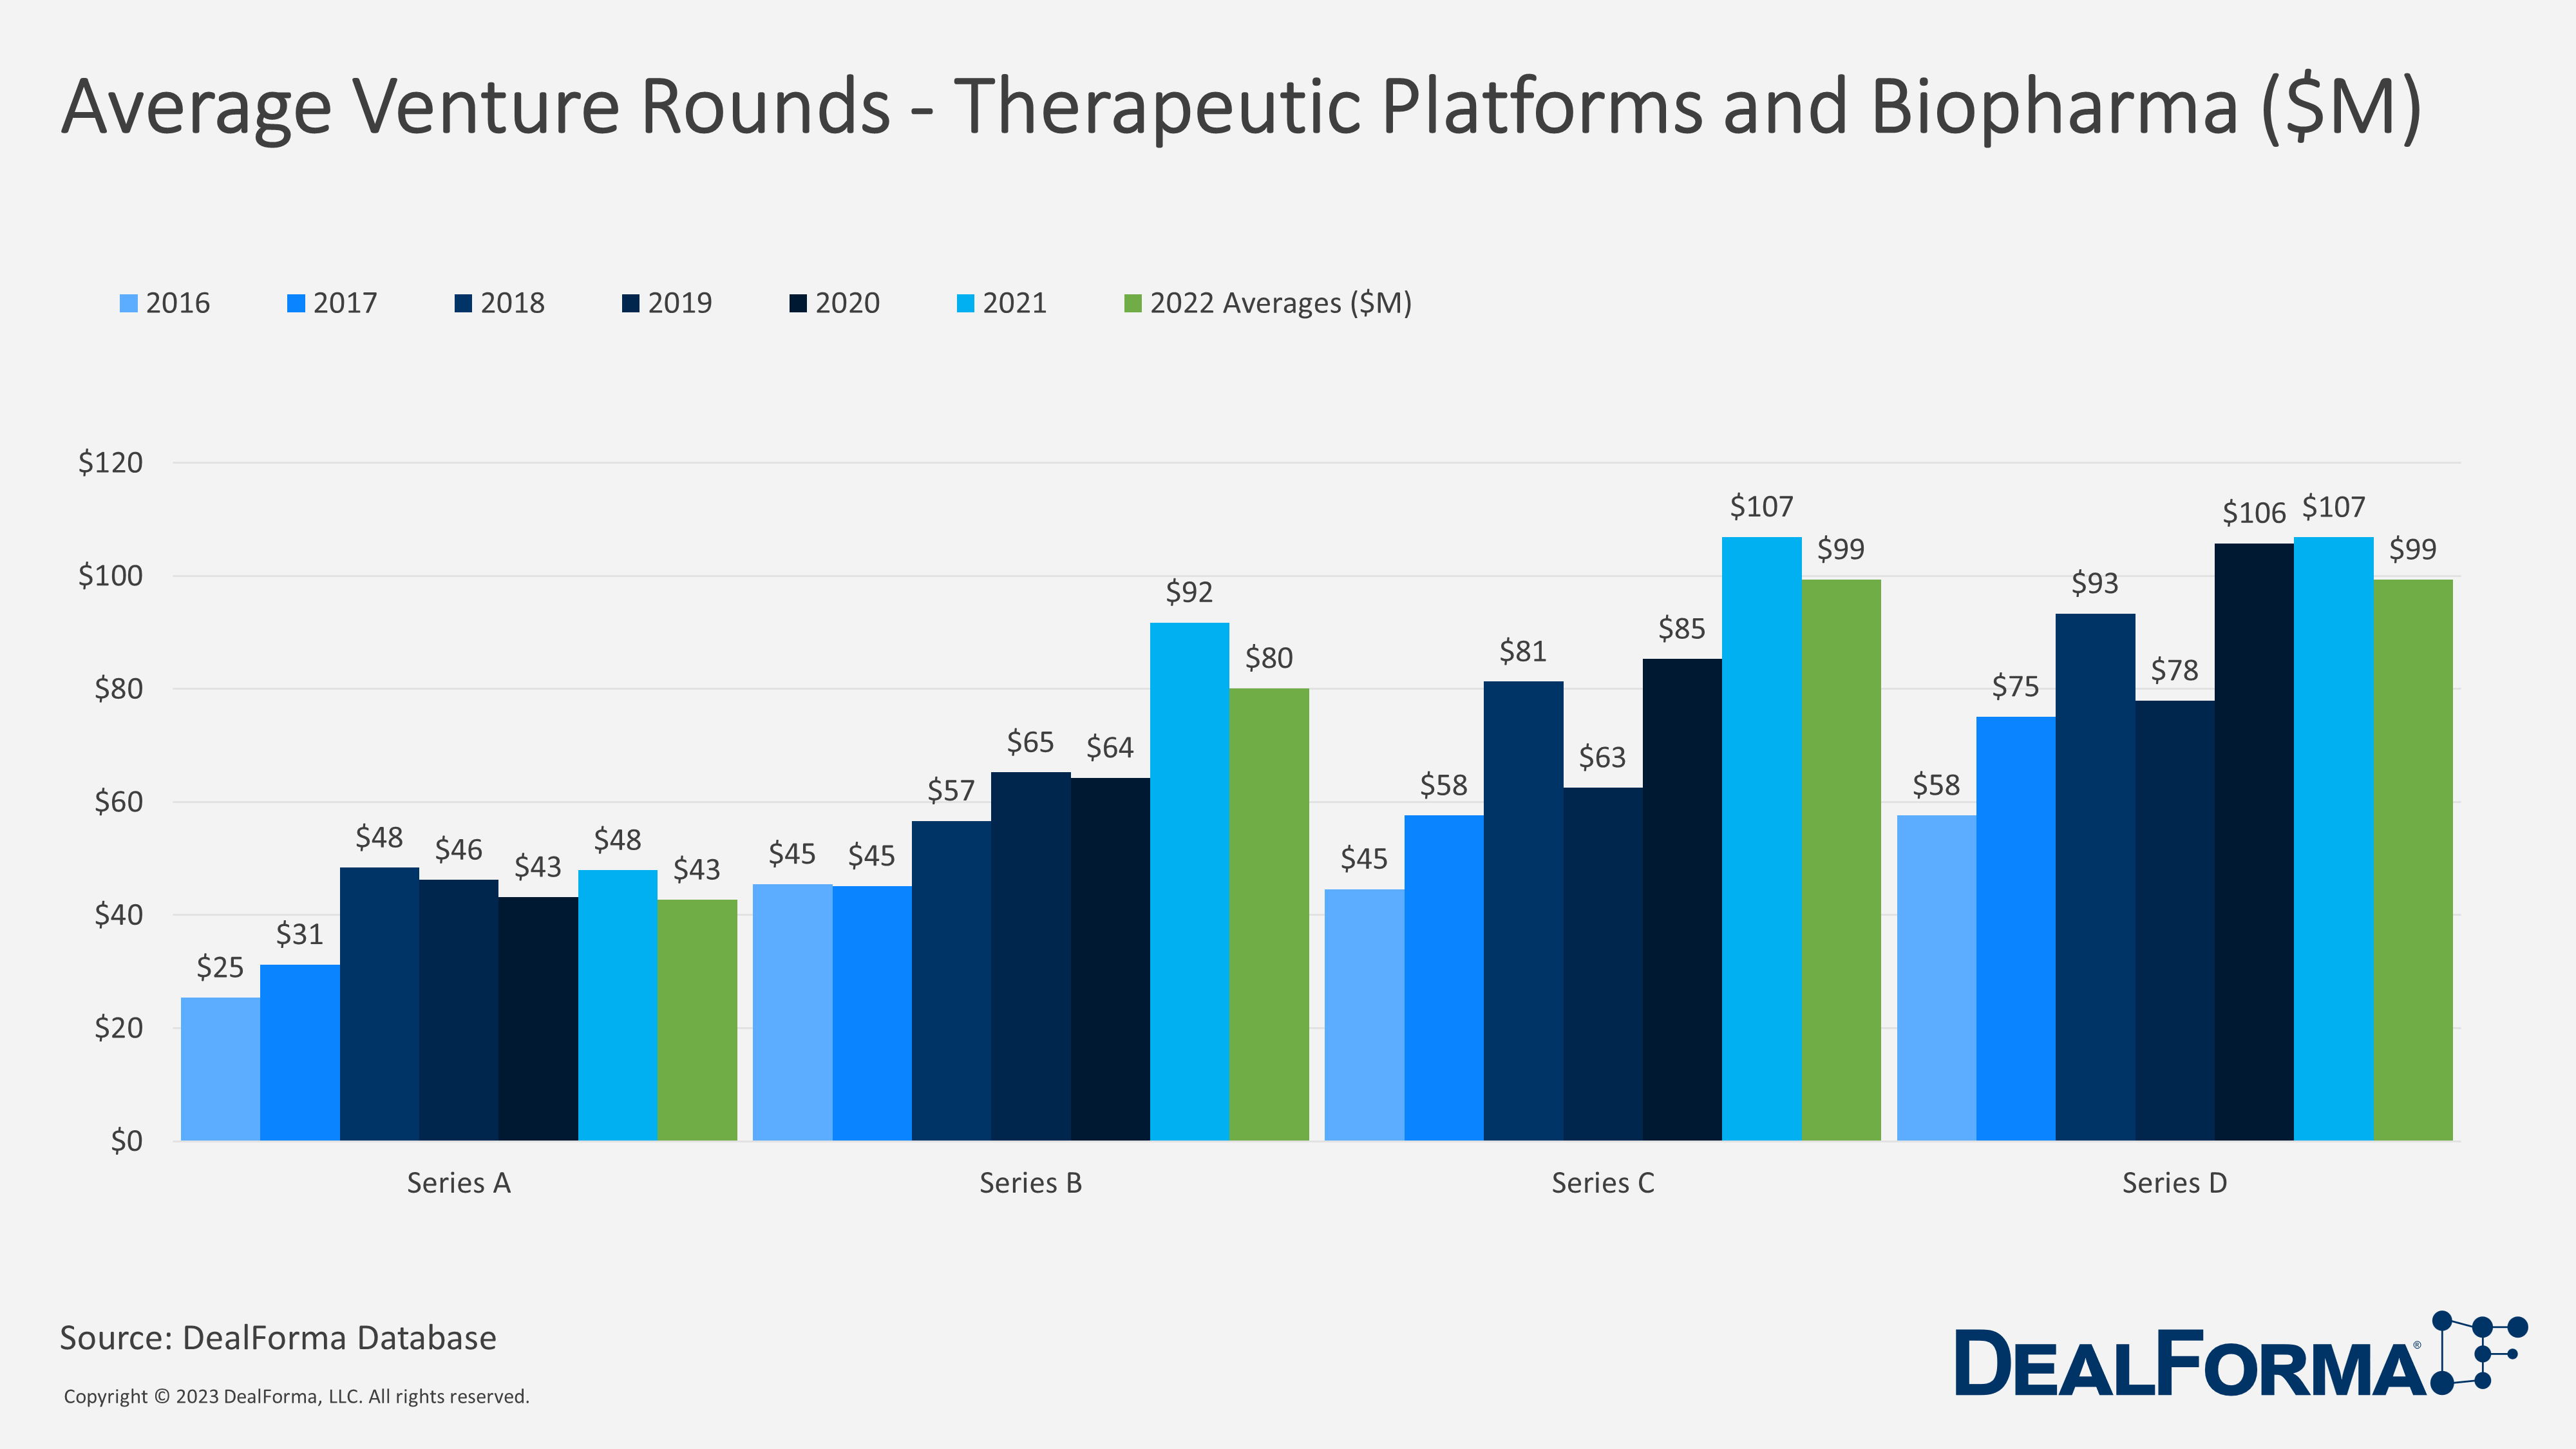 Average Venture Rounds - Therapeutic Platforms and Biopharma